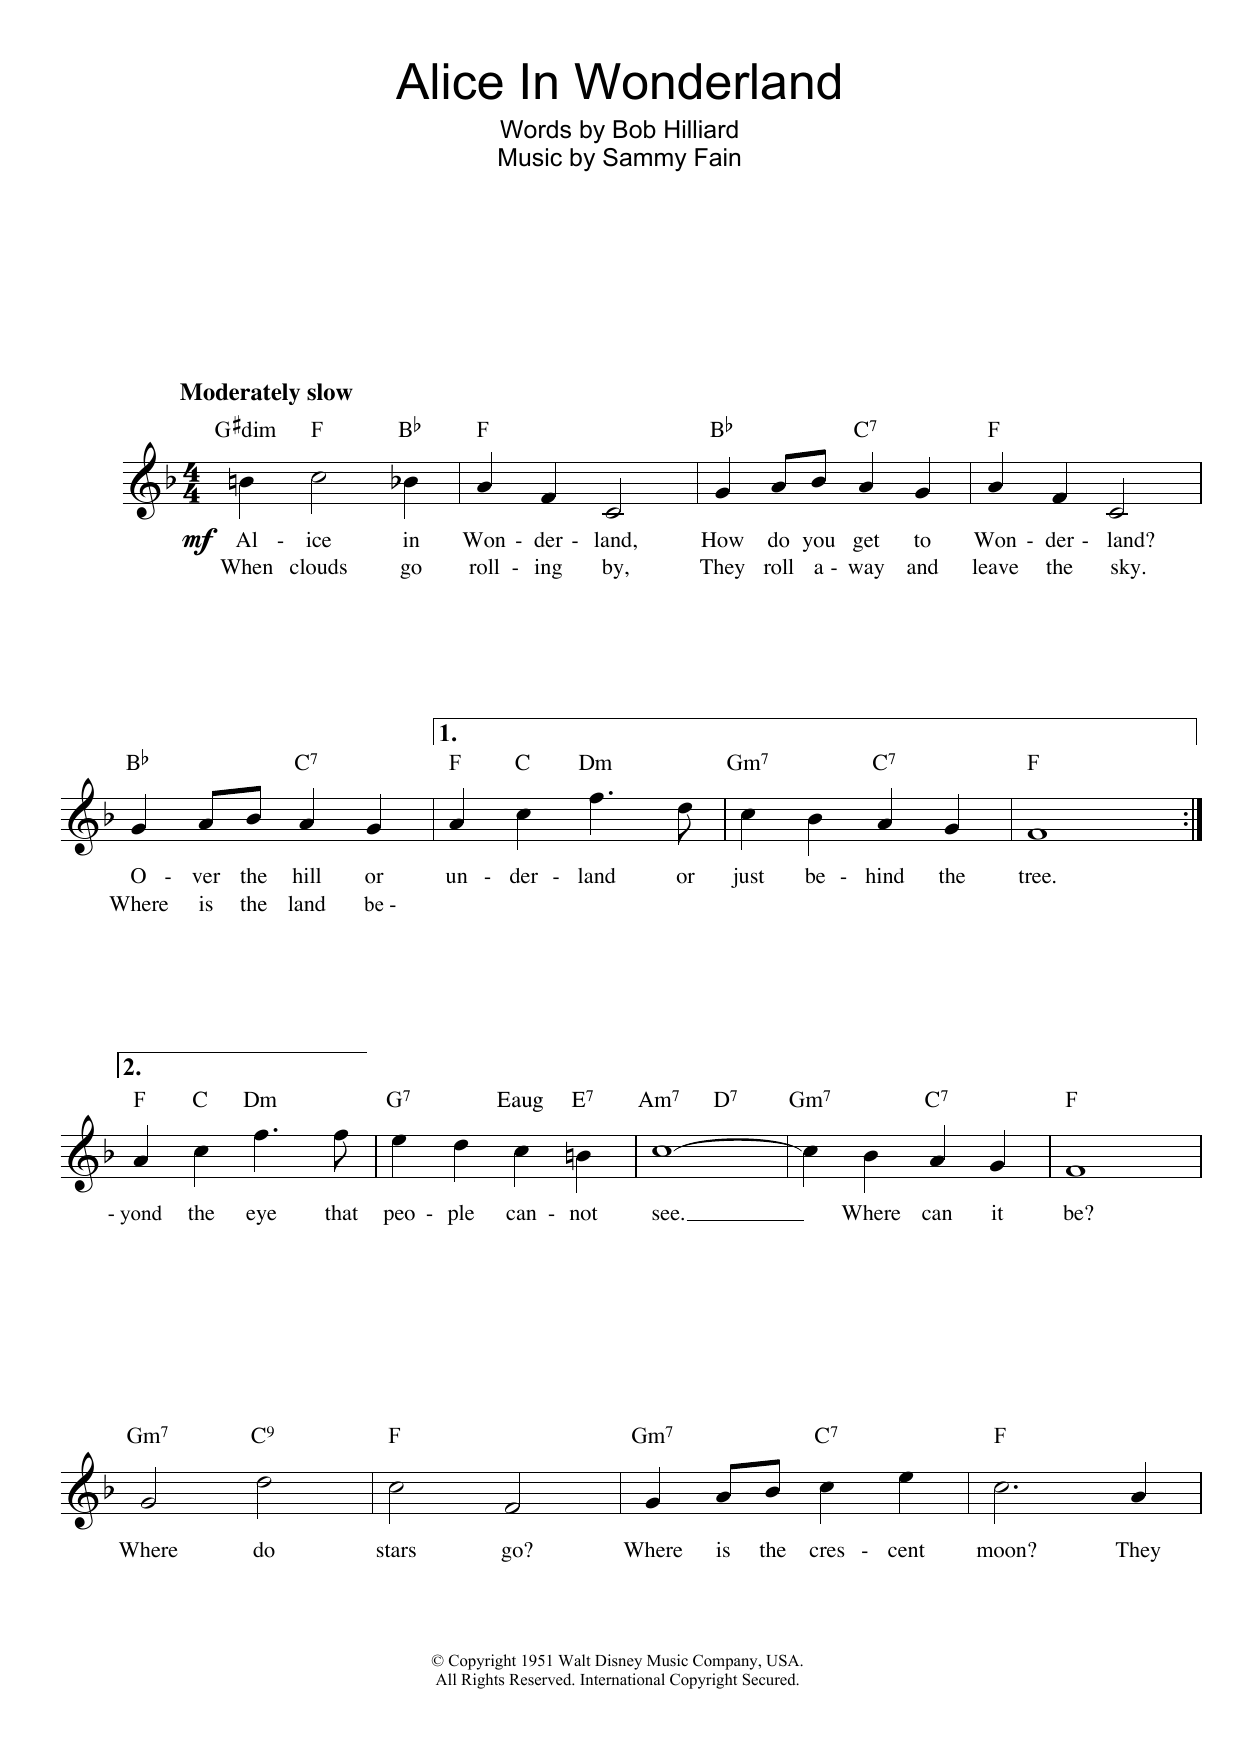 Bob Hilliard Alice In Wonderland sheet music notes and chords. Download Printable PDF.